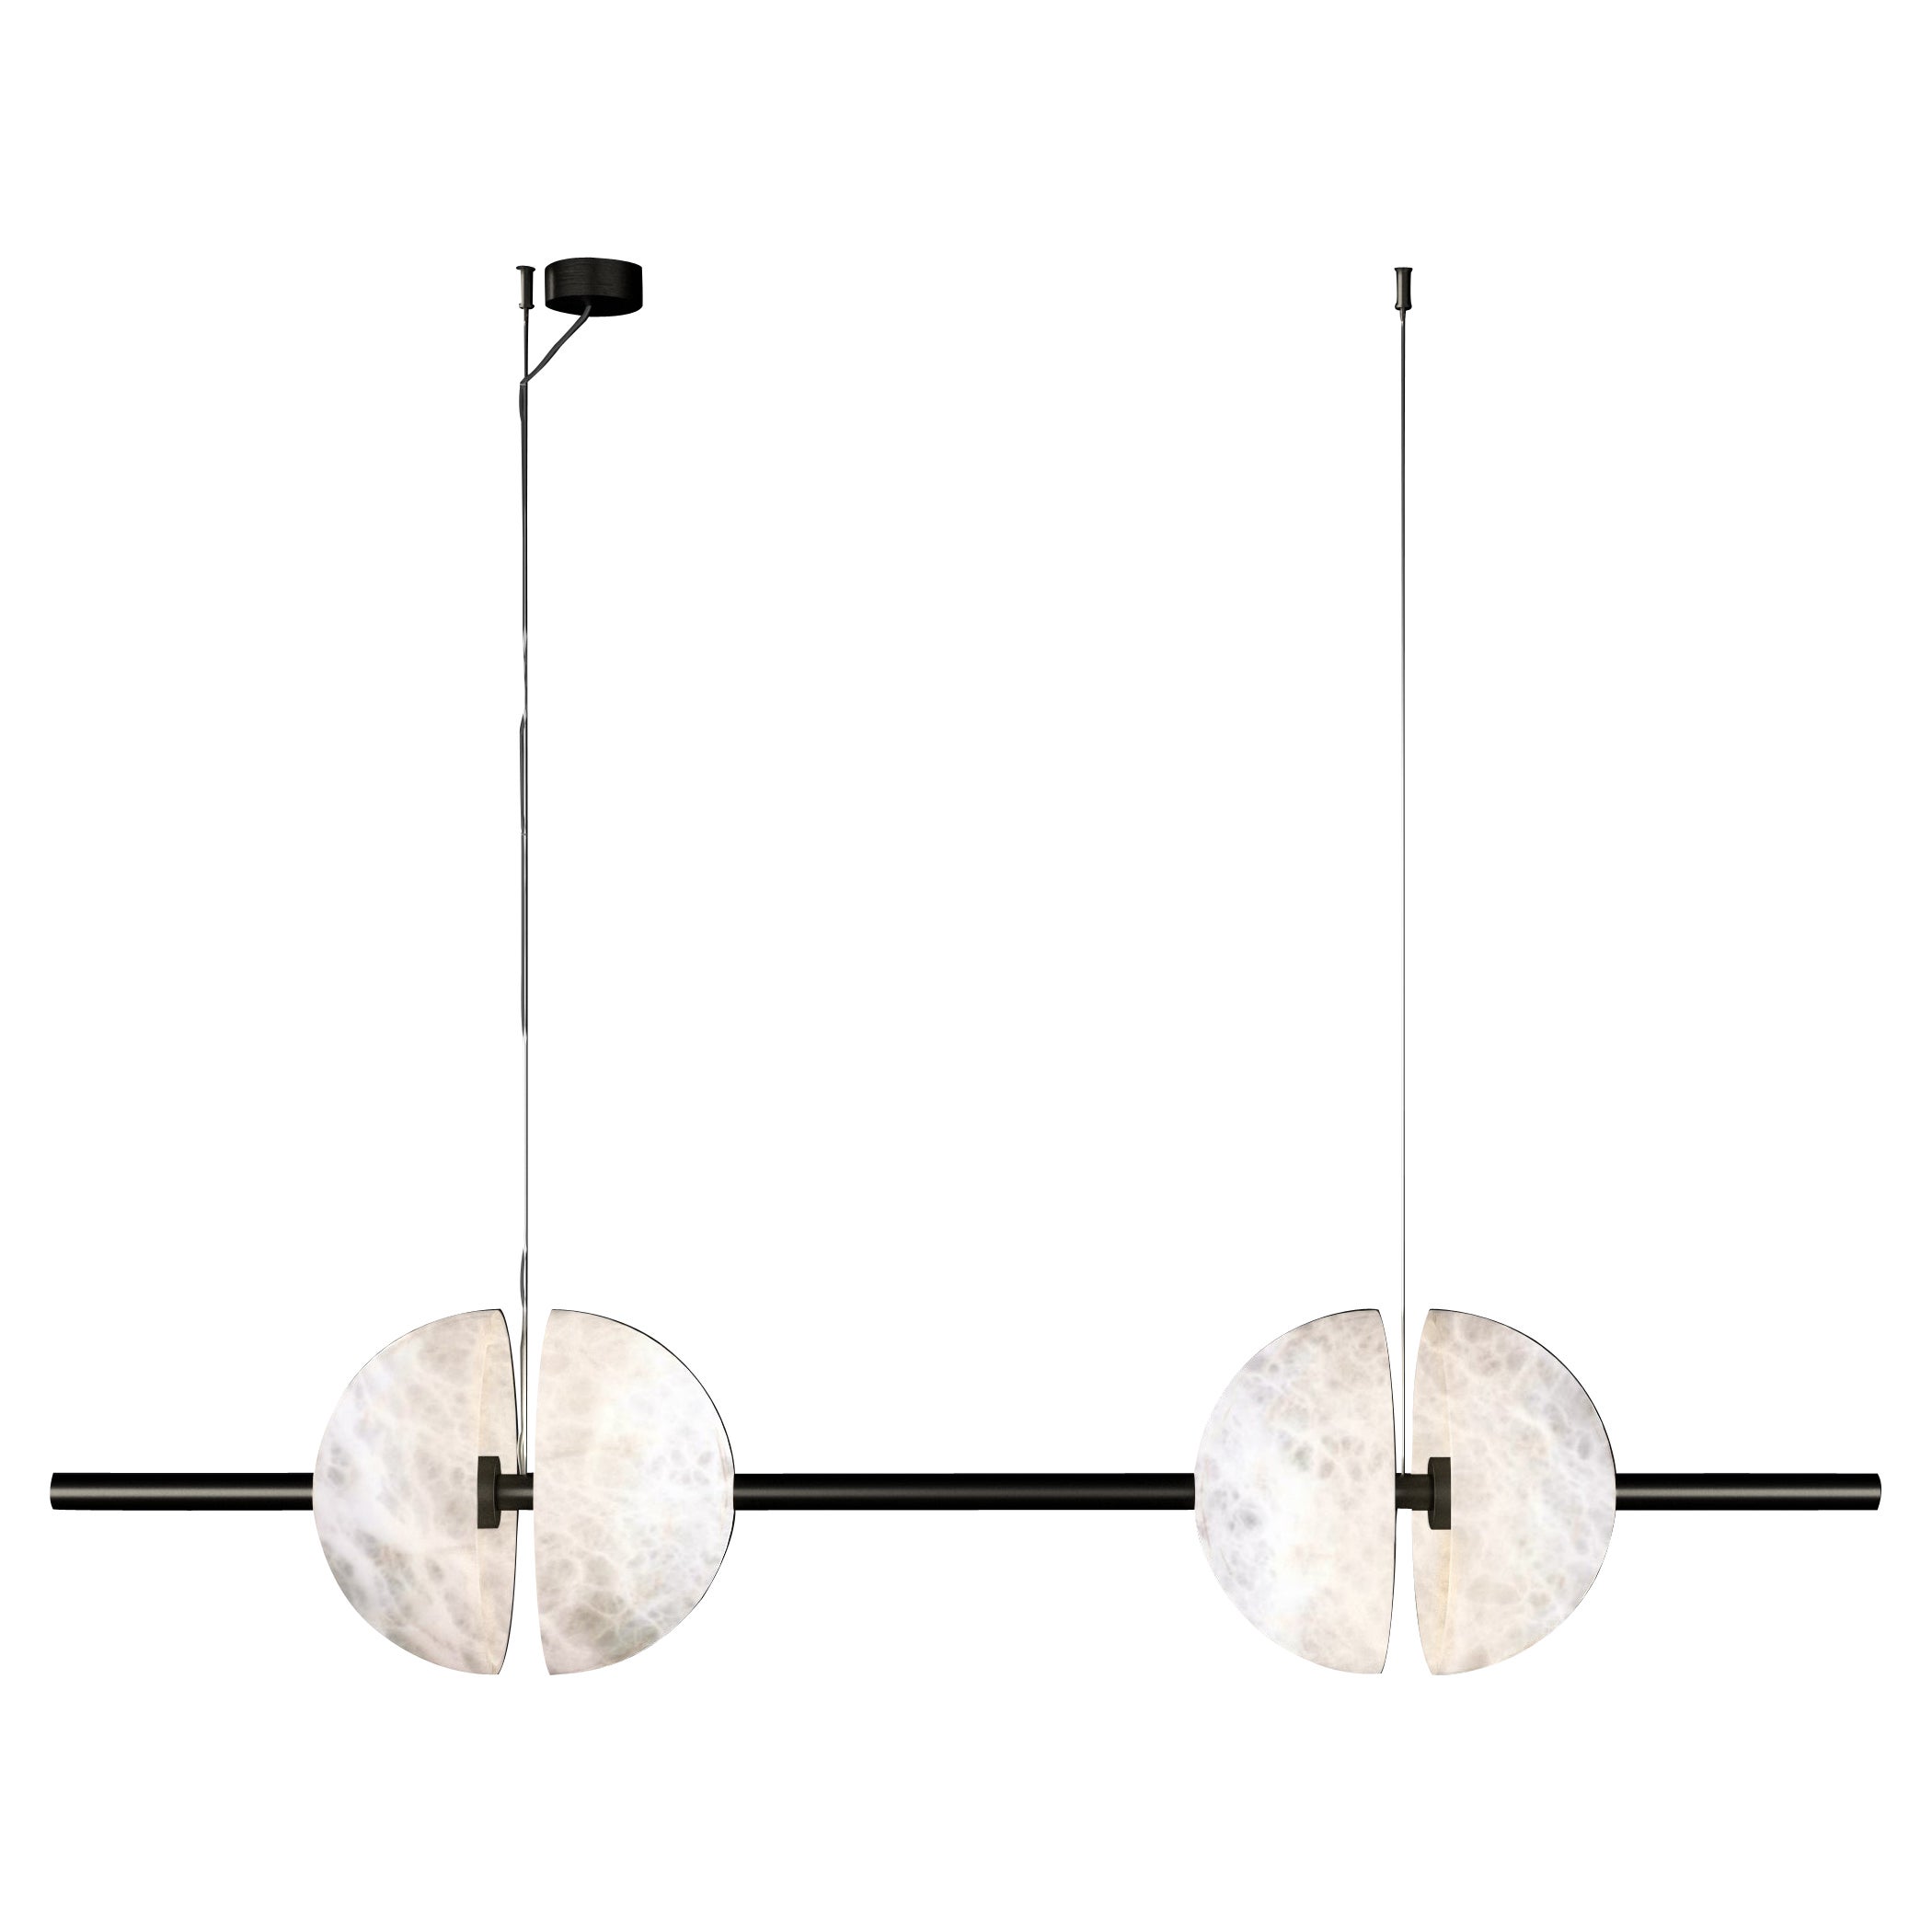 Ermes Brushed Black Metal And Alabaster Pendant Light 1 by Alabastro Italiano